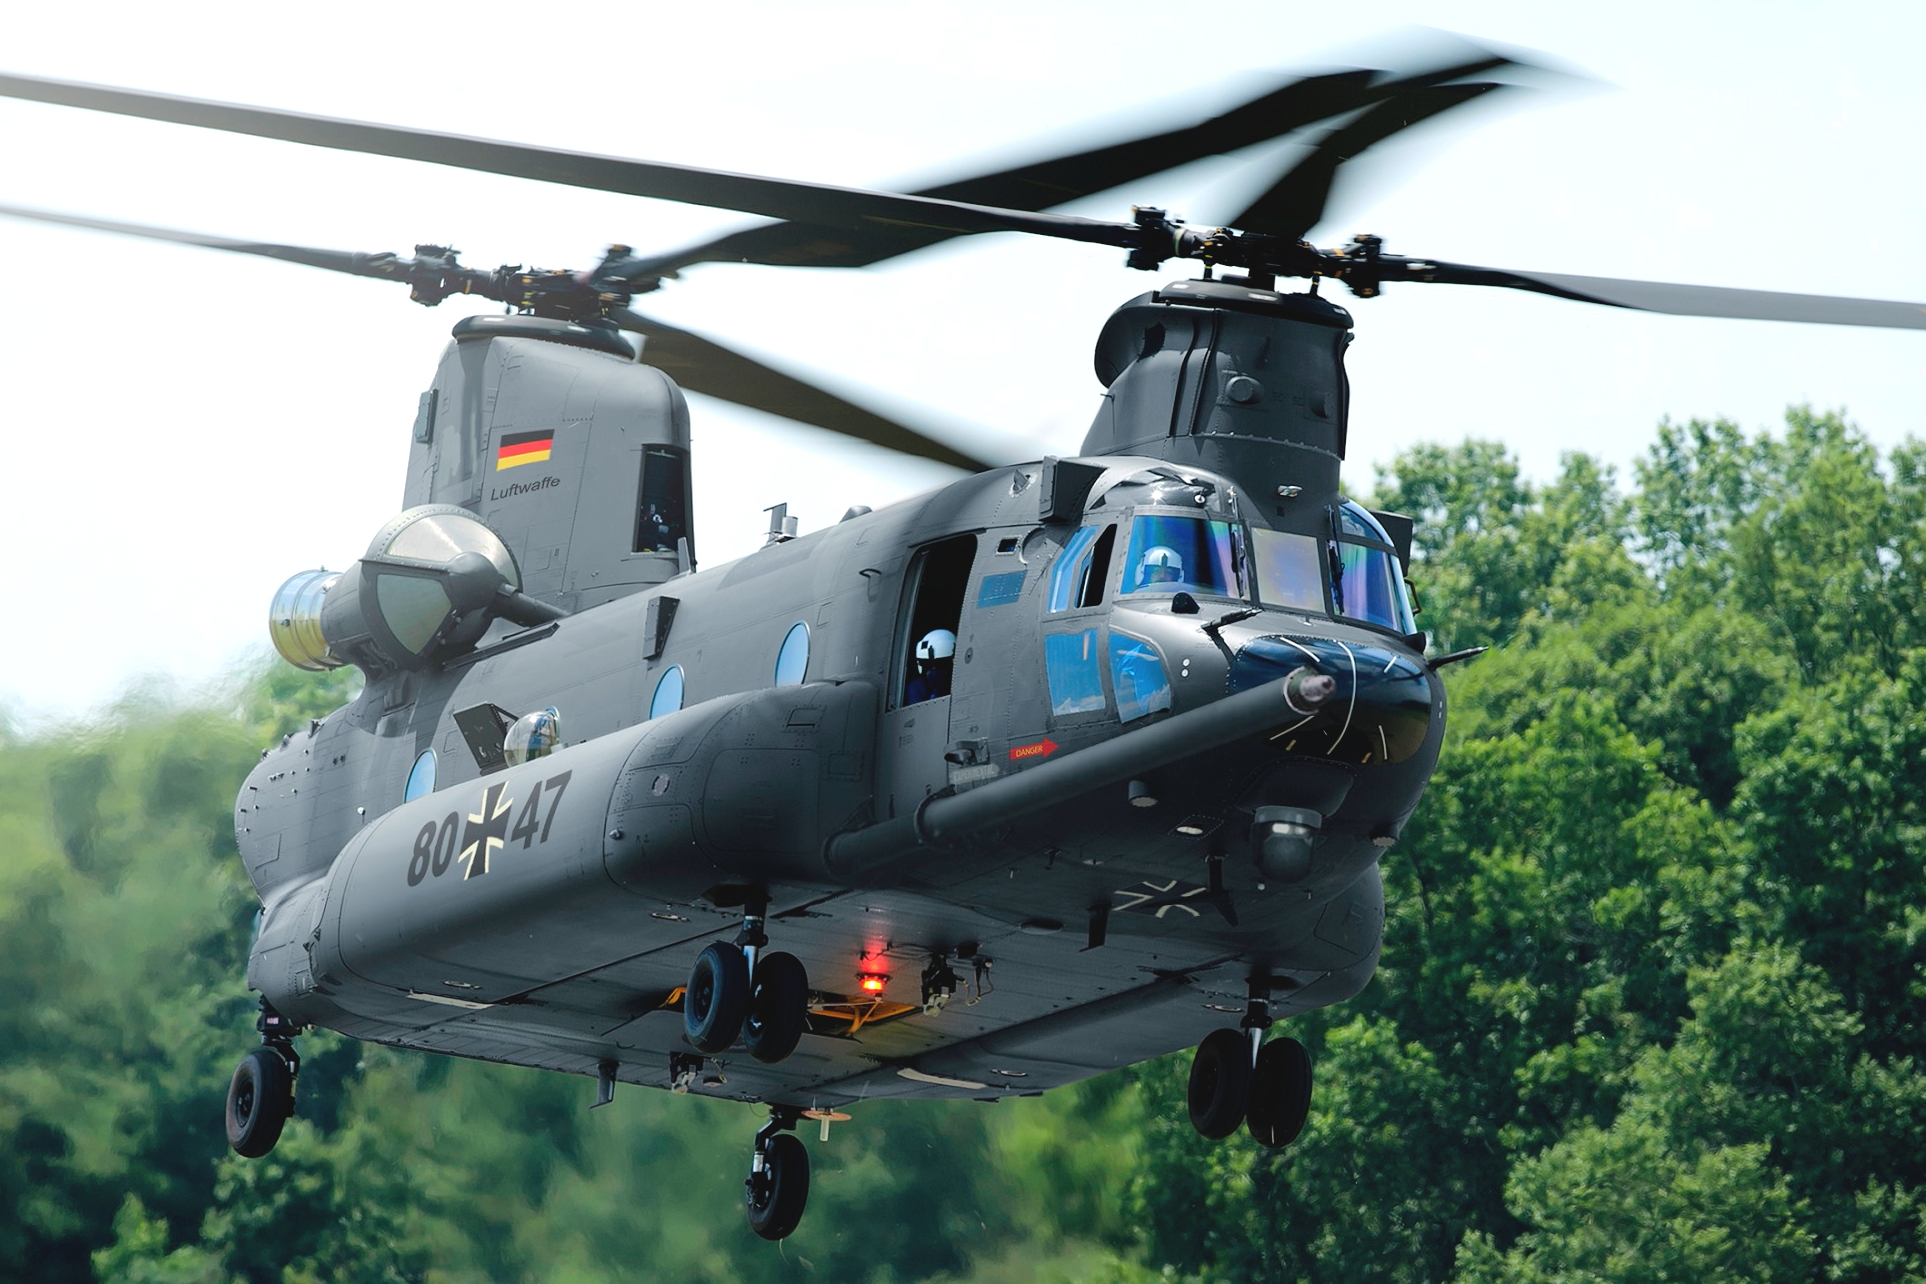 Boeing, Honeywell Aerospace and Rolls-Royce Deutschland have reached an agreement to provide in-service support of the T-55 engine should the government of Germany select the H-47 Chinook for its Schwerer Transporthubschrauber (STH) heavy-lift helicopter requirement. Click to enlarge.